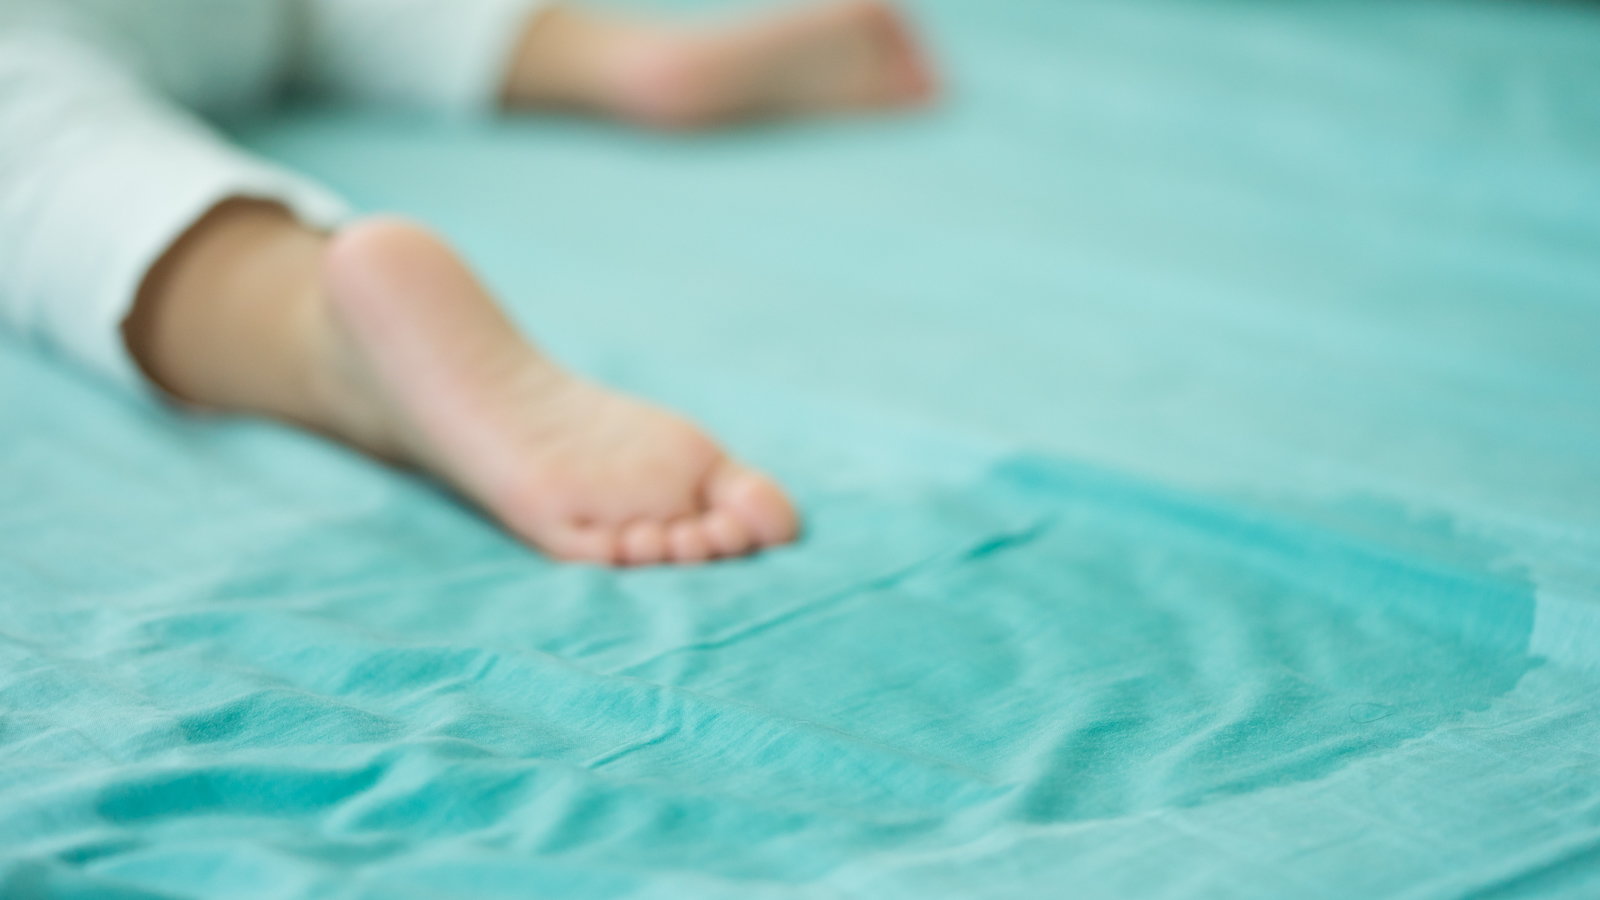 child's foot on wet bed